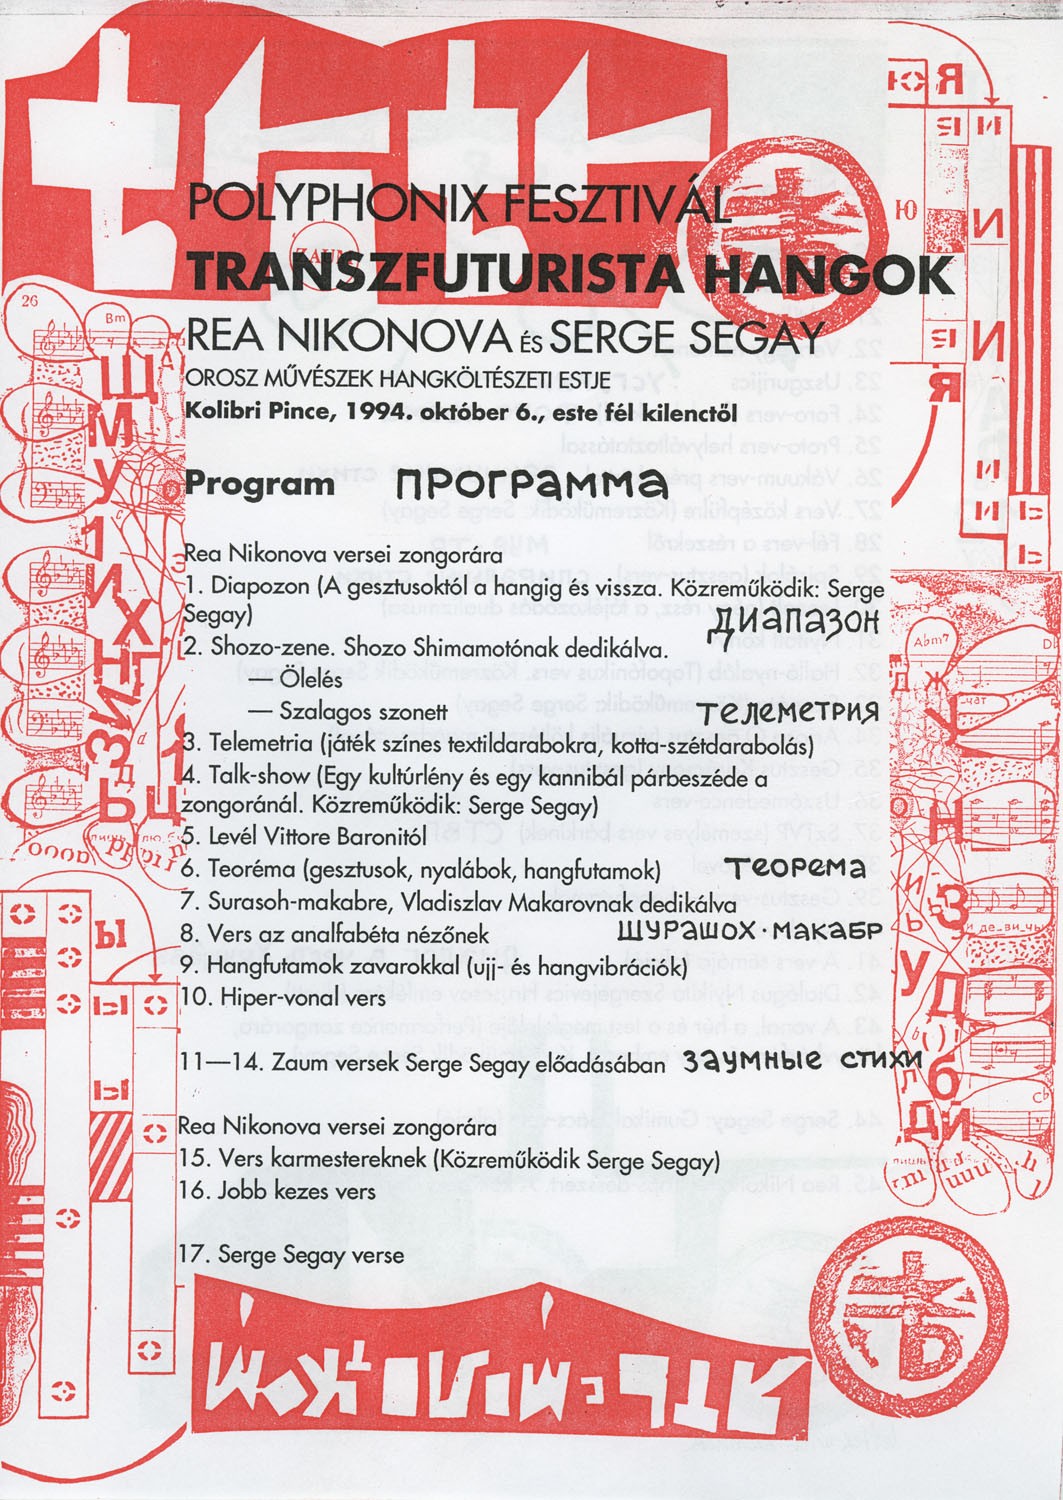 Poster for Transfuturist Sounds - performances by the Russian sound poets Rea Nikonova and Serge Segay, the final event of Polyphonix Festival organized by Artpool at Kolibri Pince, Budapest, 1994 (1st page)